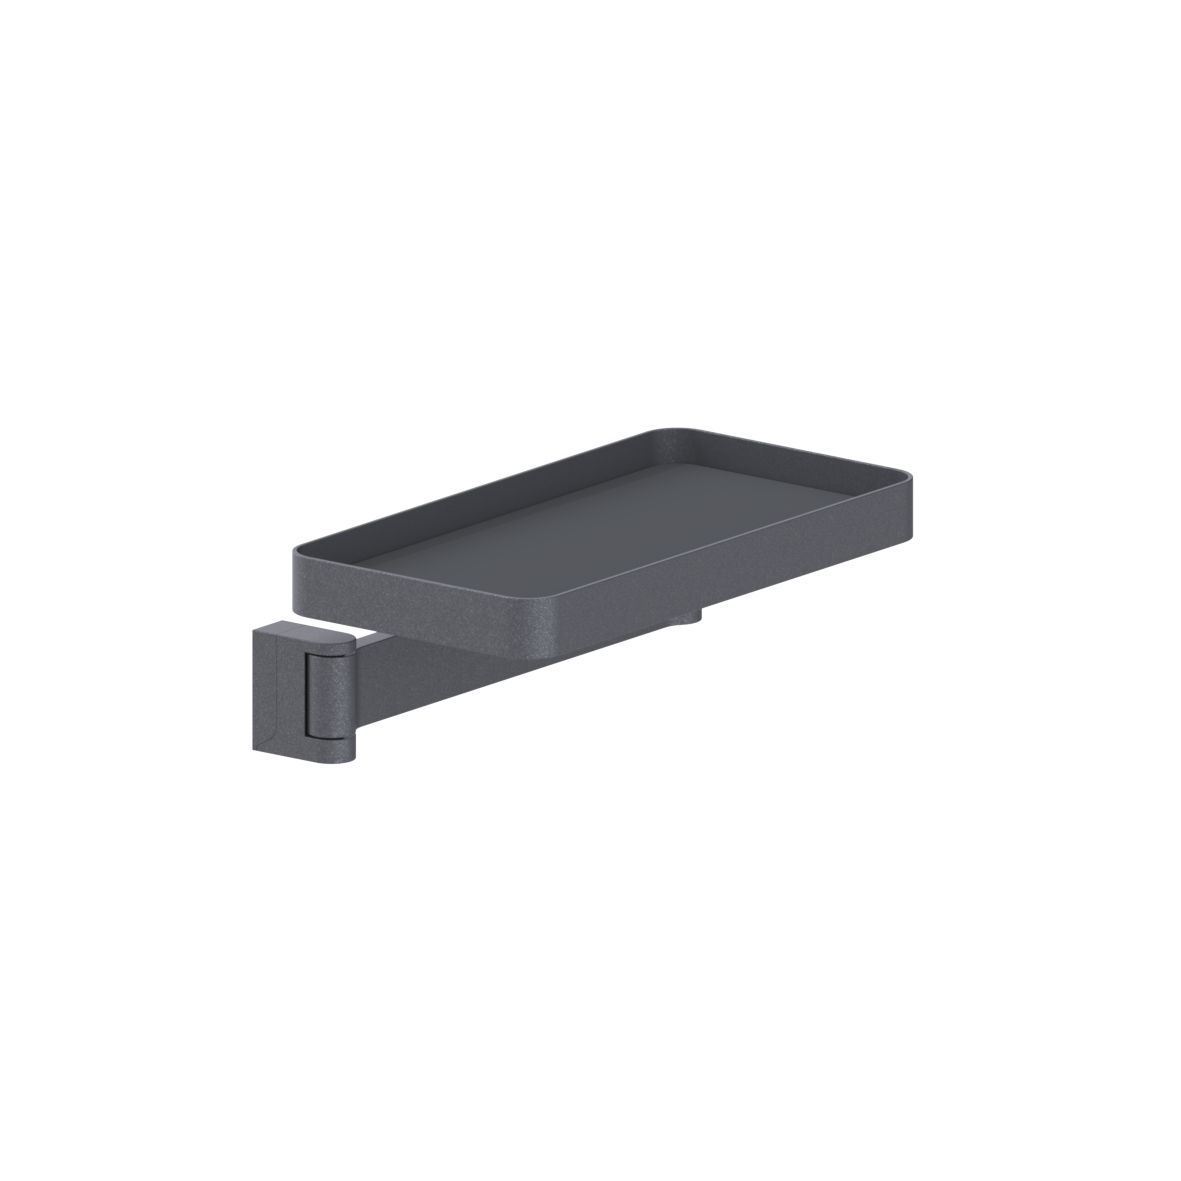 Cavere Care FlexTray, for wall mounting, left, 308 x 158 x 104 mm, Cavere Metallic anthracite